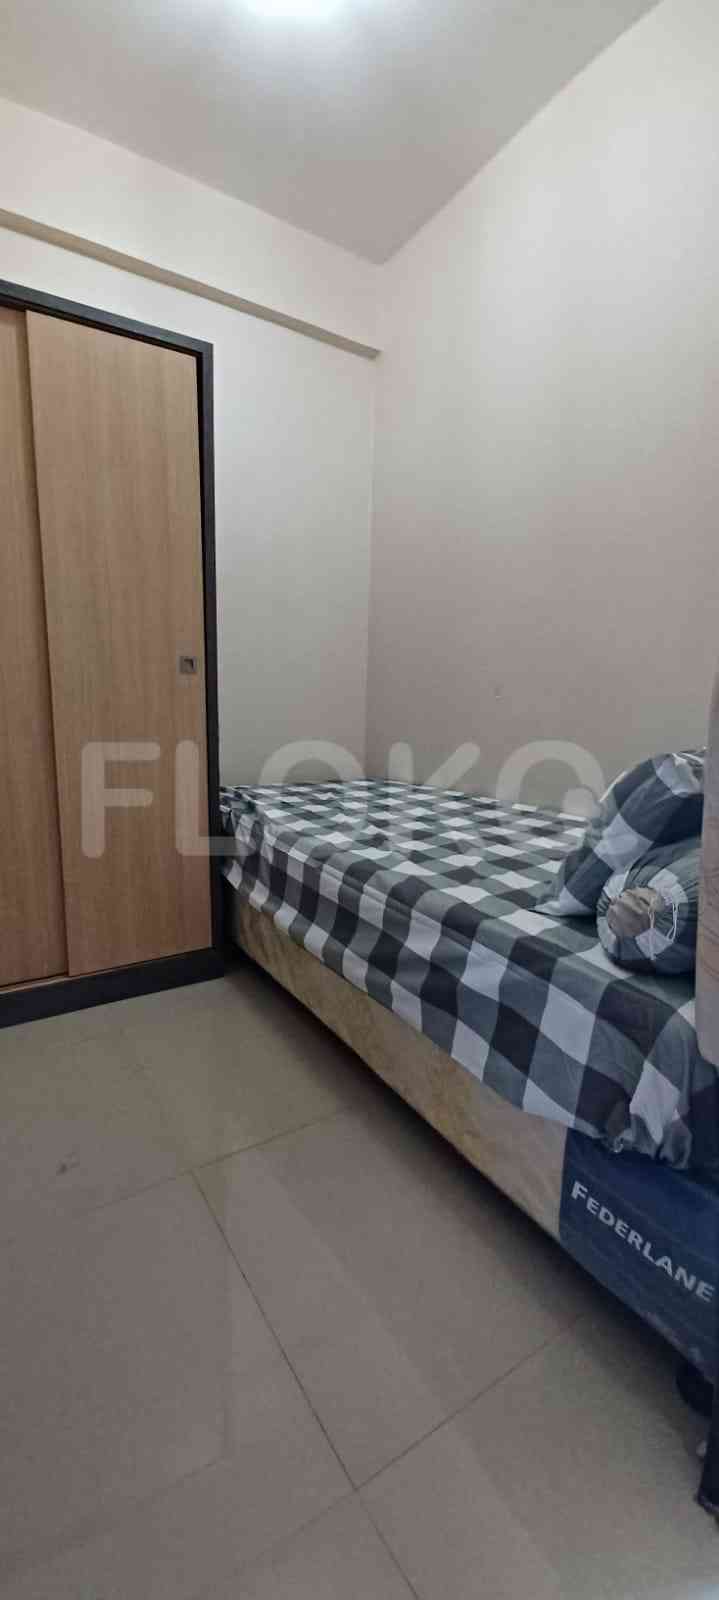 2 Bedroom on 15th Floor for Rent in Paragon Village Apartment - fkaecb 1